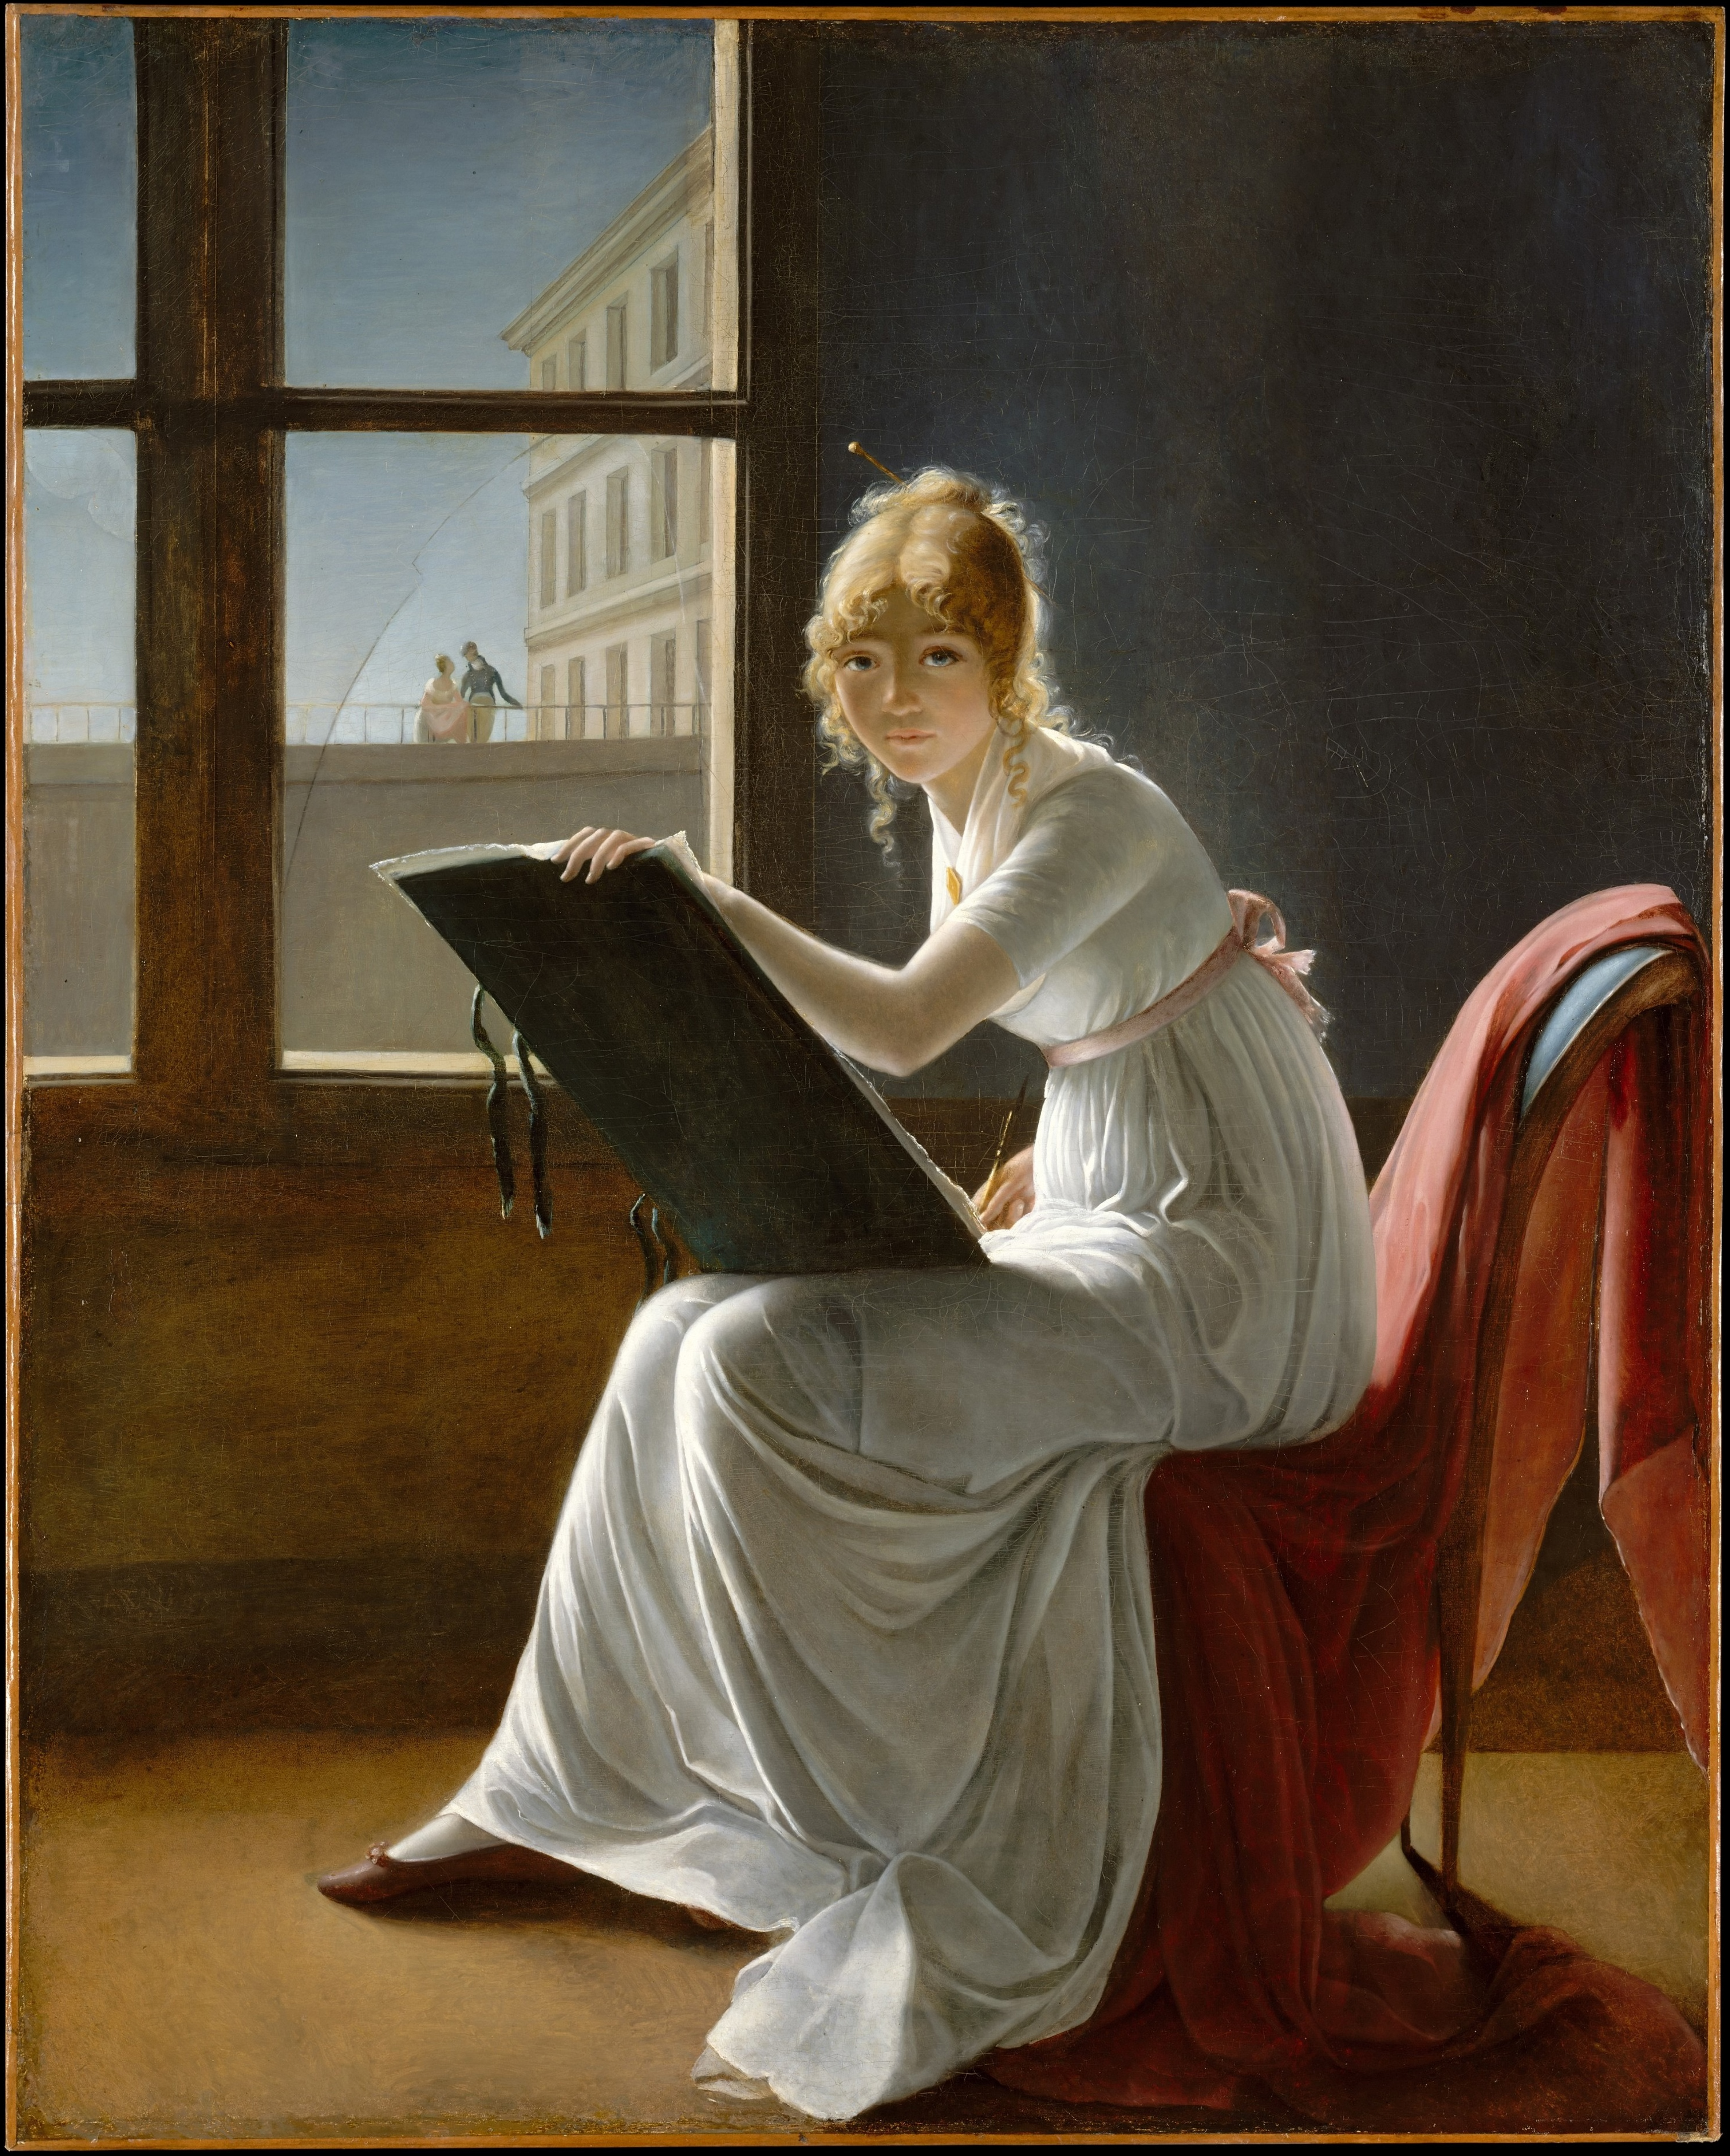 https://upload.wikimedia.org/wikipedia/commons/5/5a/Villers_Young_Woman_Drawing.jpg